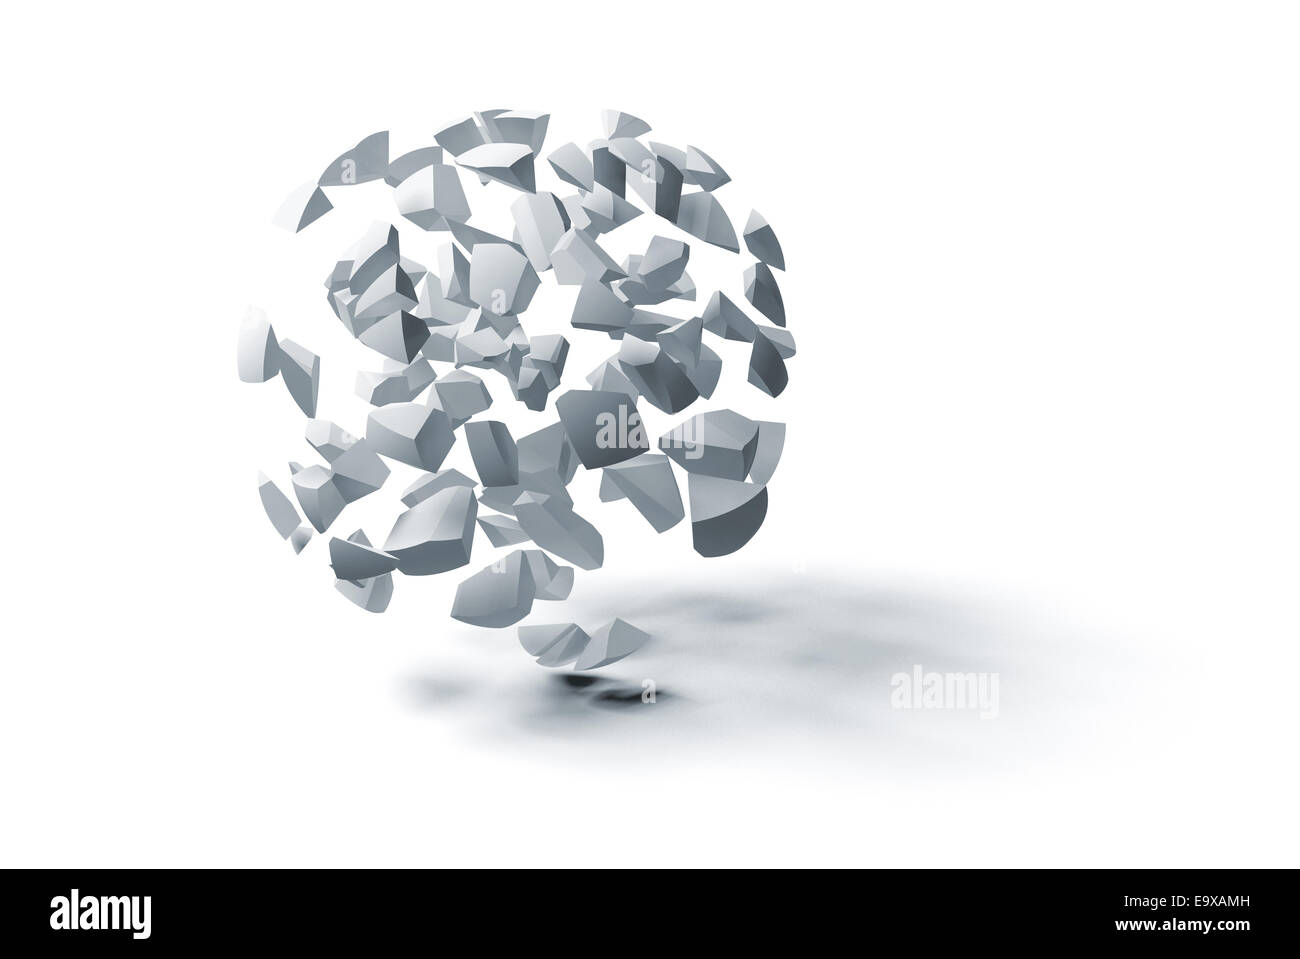 Abstract 3d object, cloud of small spherical fragments isolated on white Stock Photo